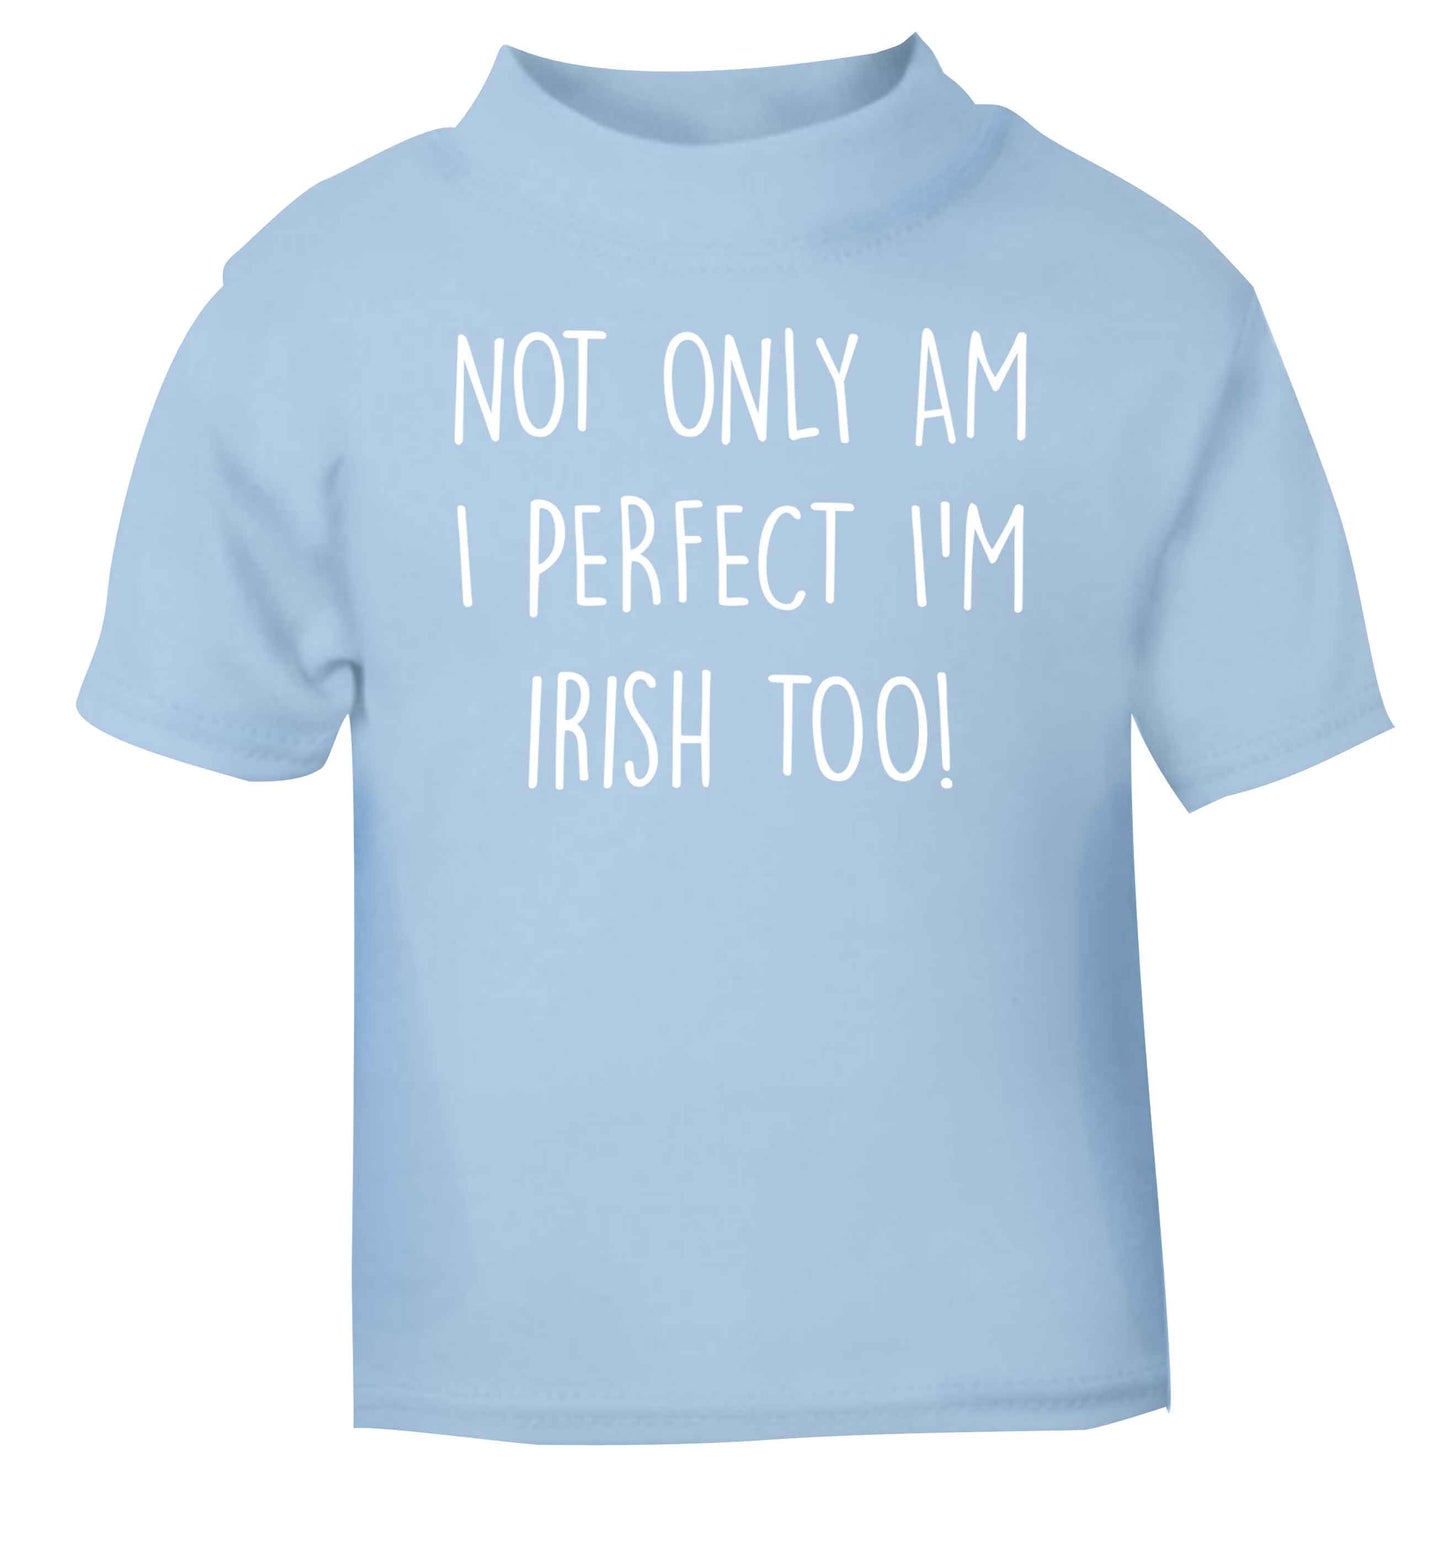 Not only am I perfect I'm Irish too! light blue baby toddler Tshirt 2 Years